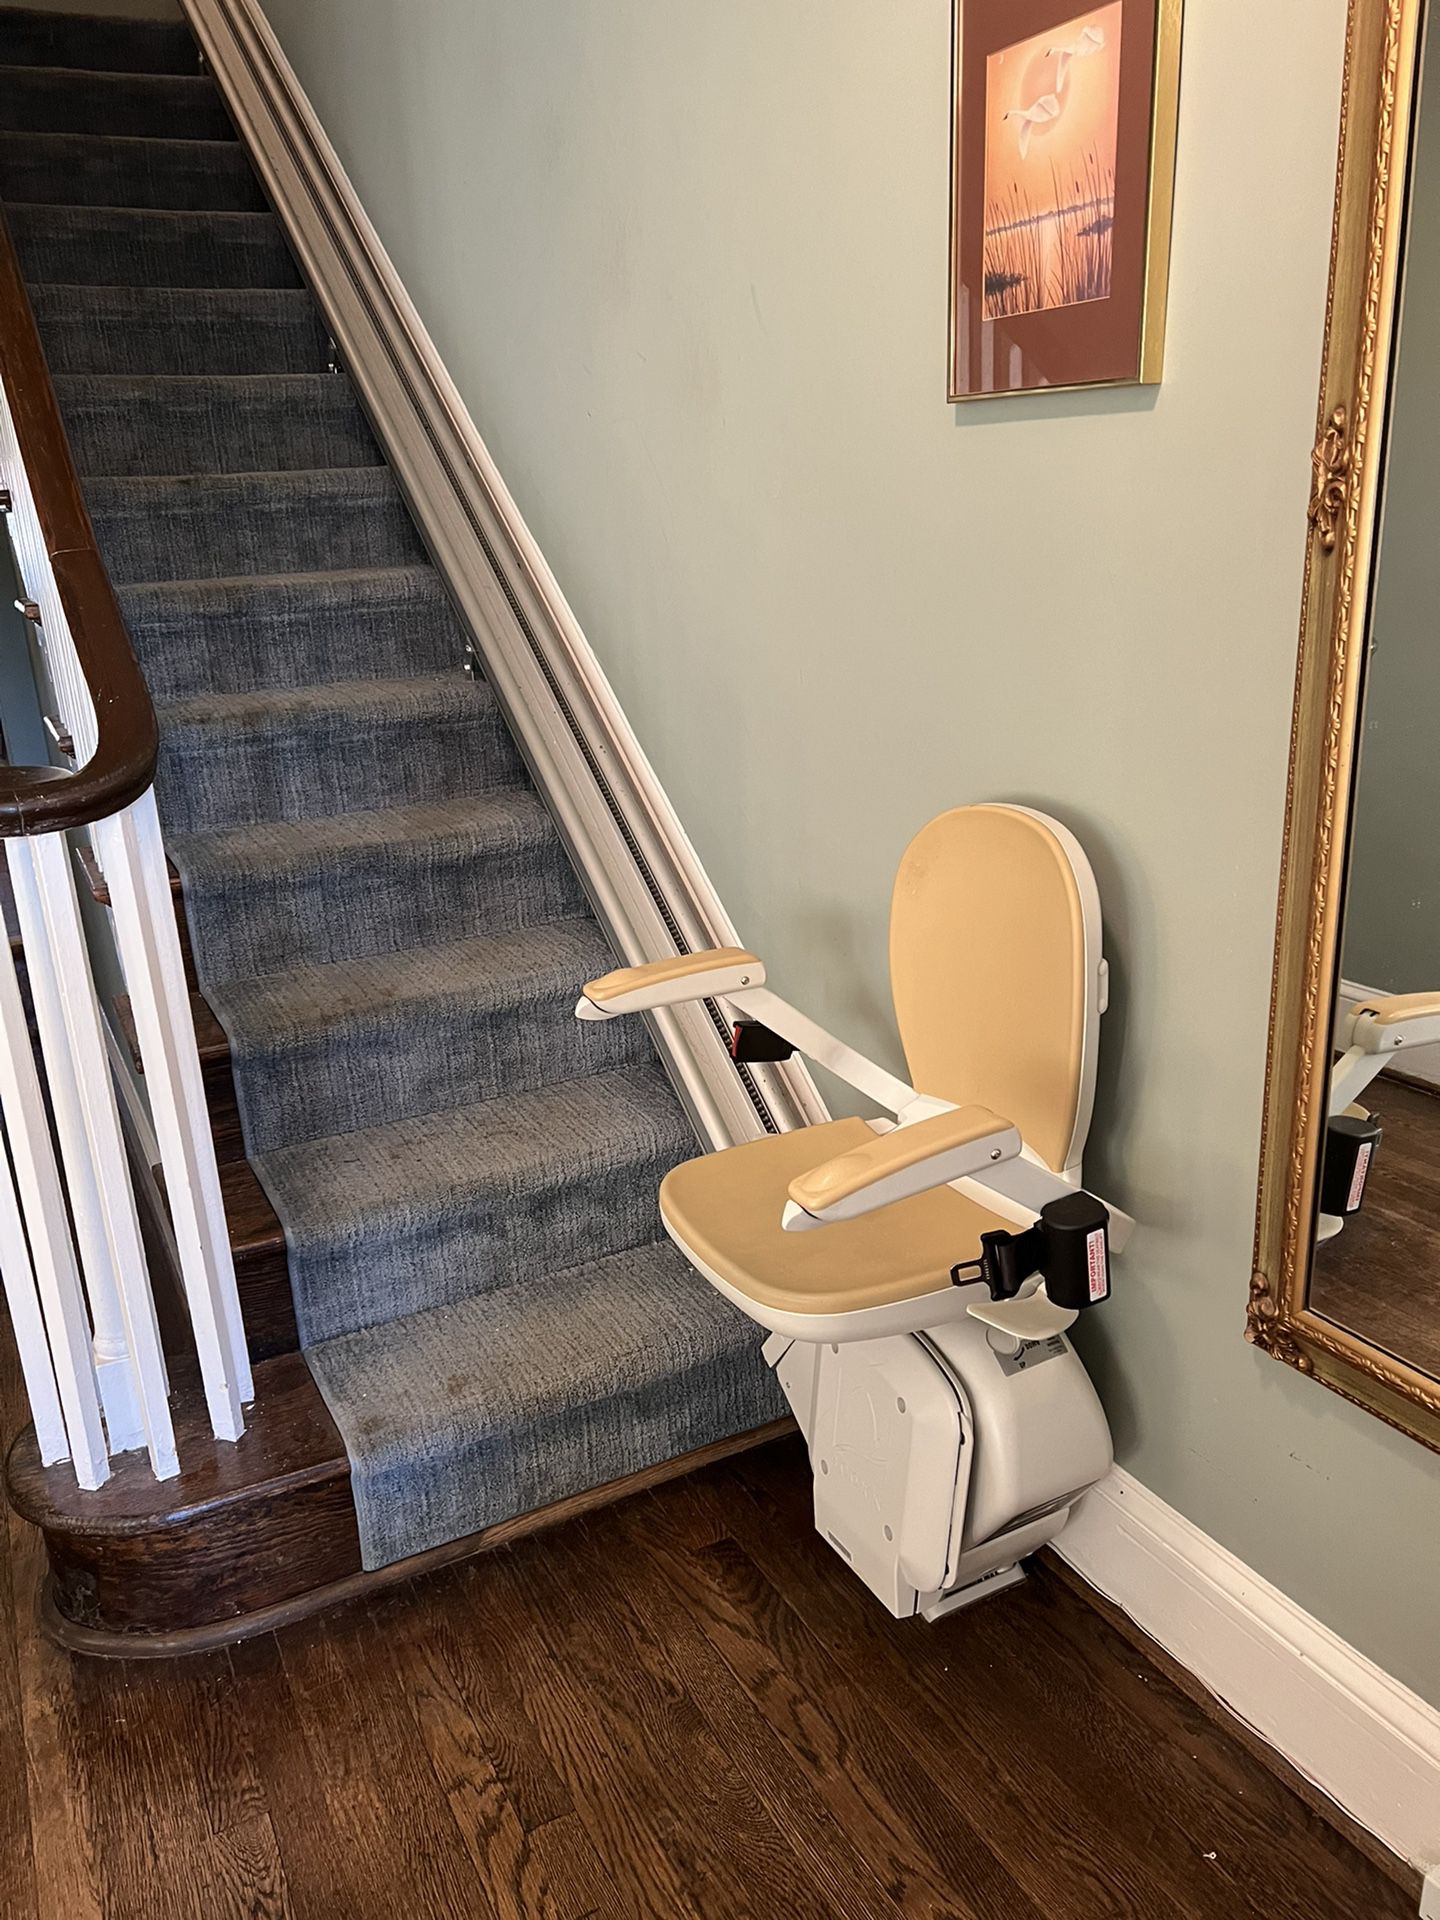 Acorn Superglide  130 stairlift  with two (2) remote  controls